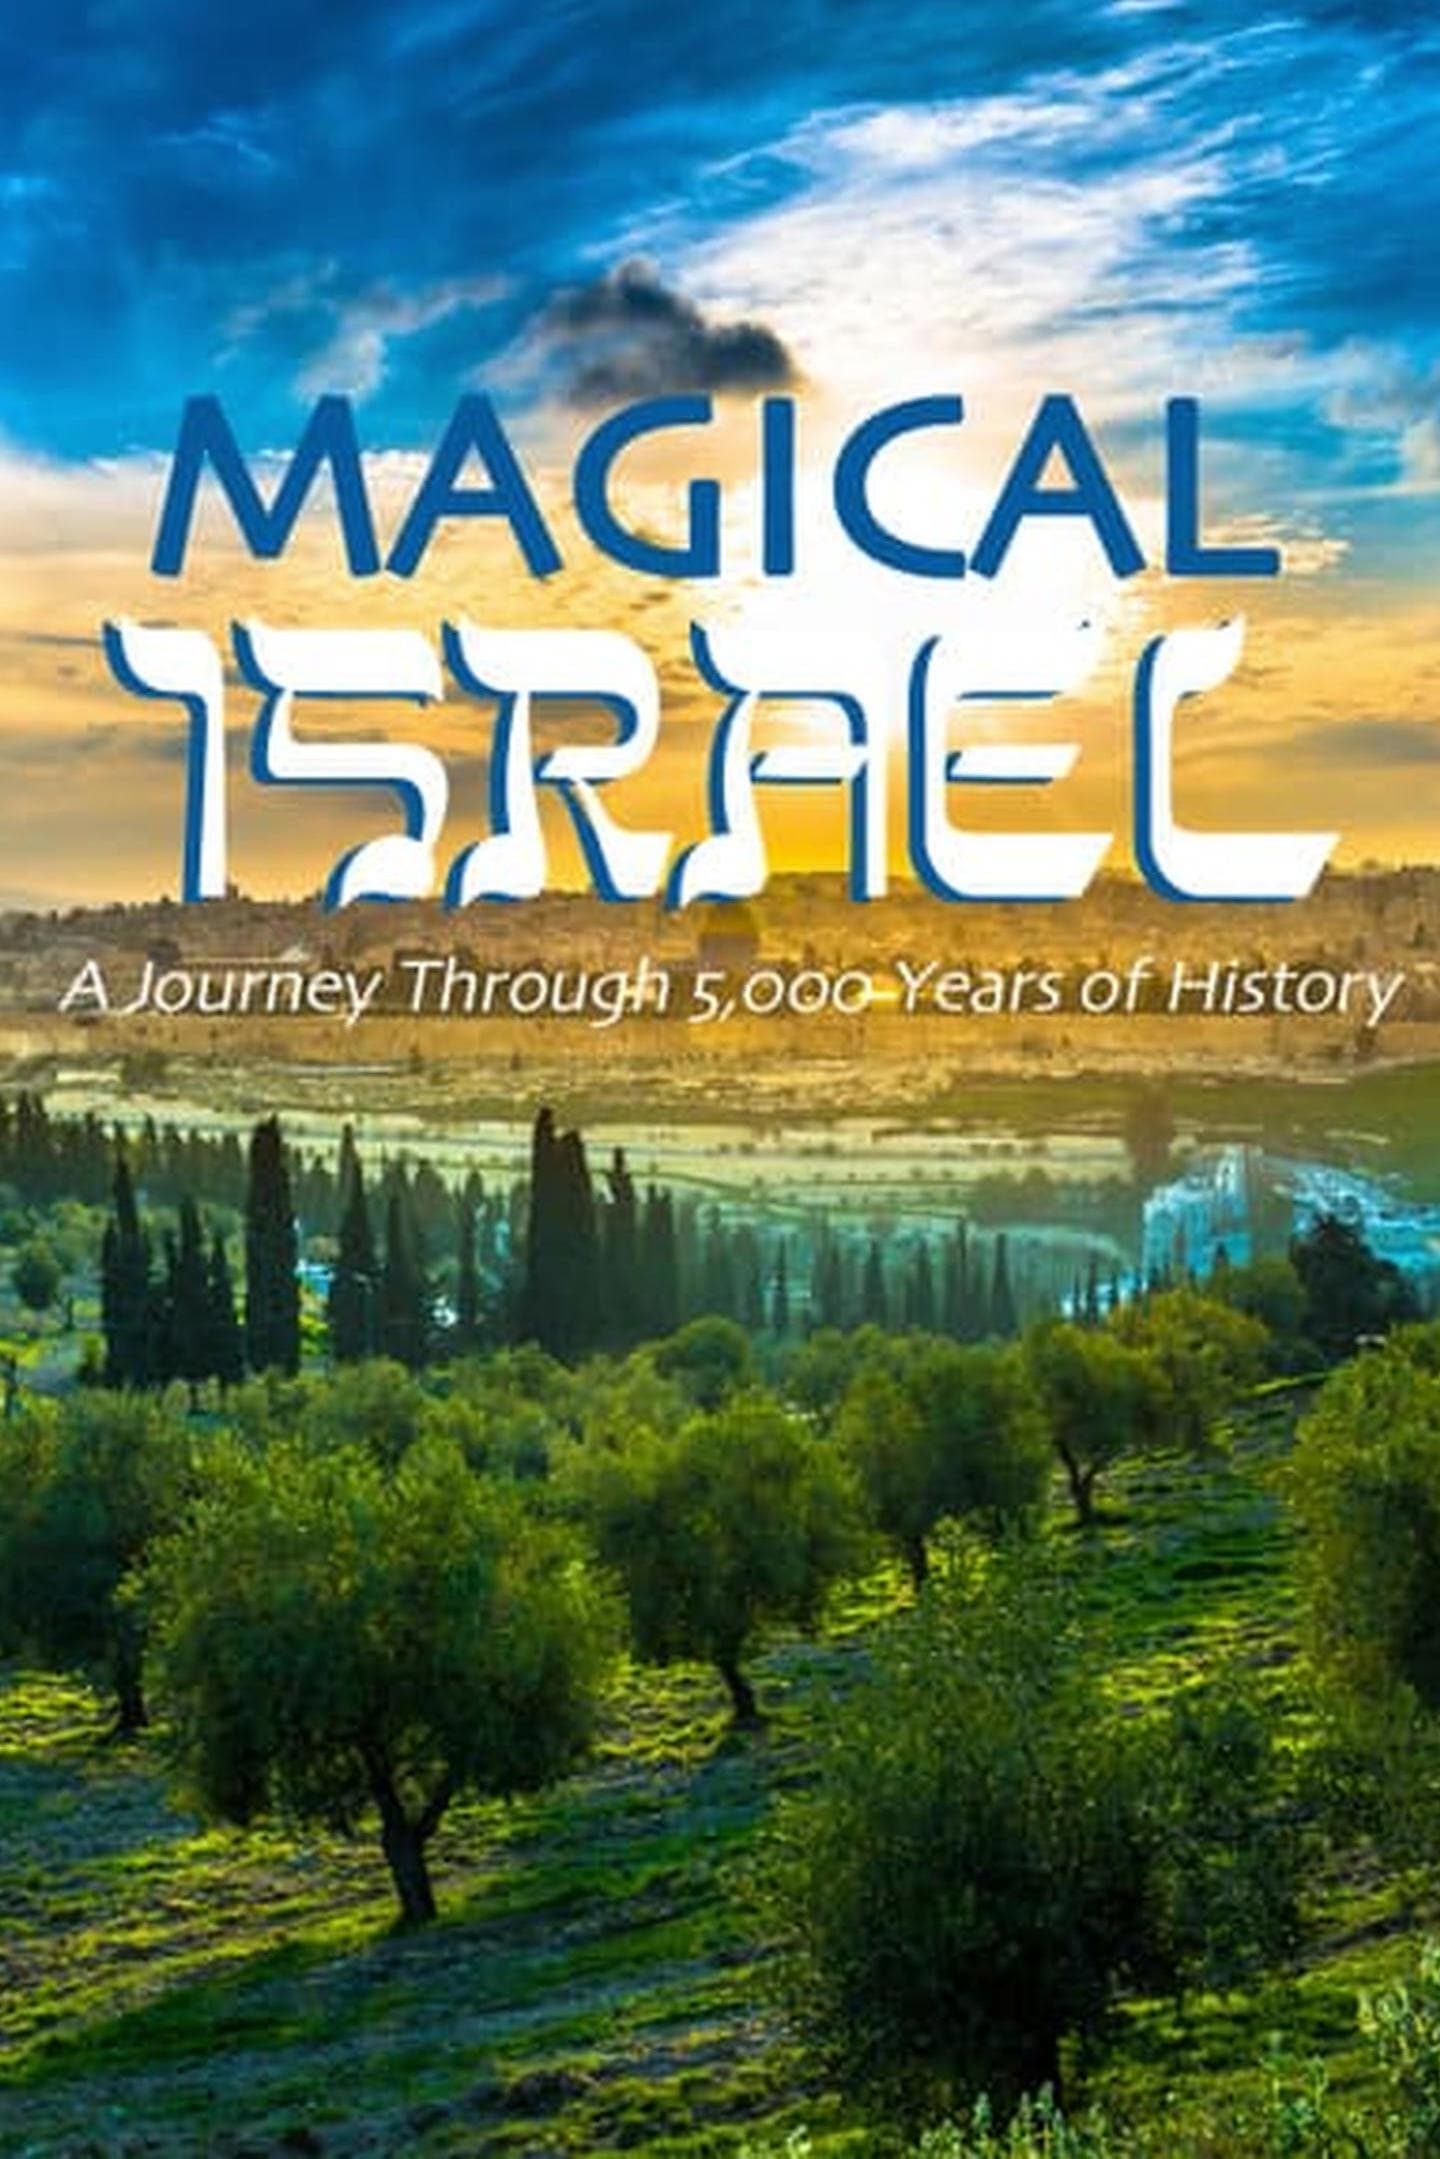 Magical Israel: A Journey Through 5,000 Years of History